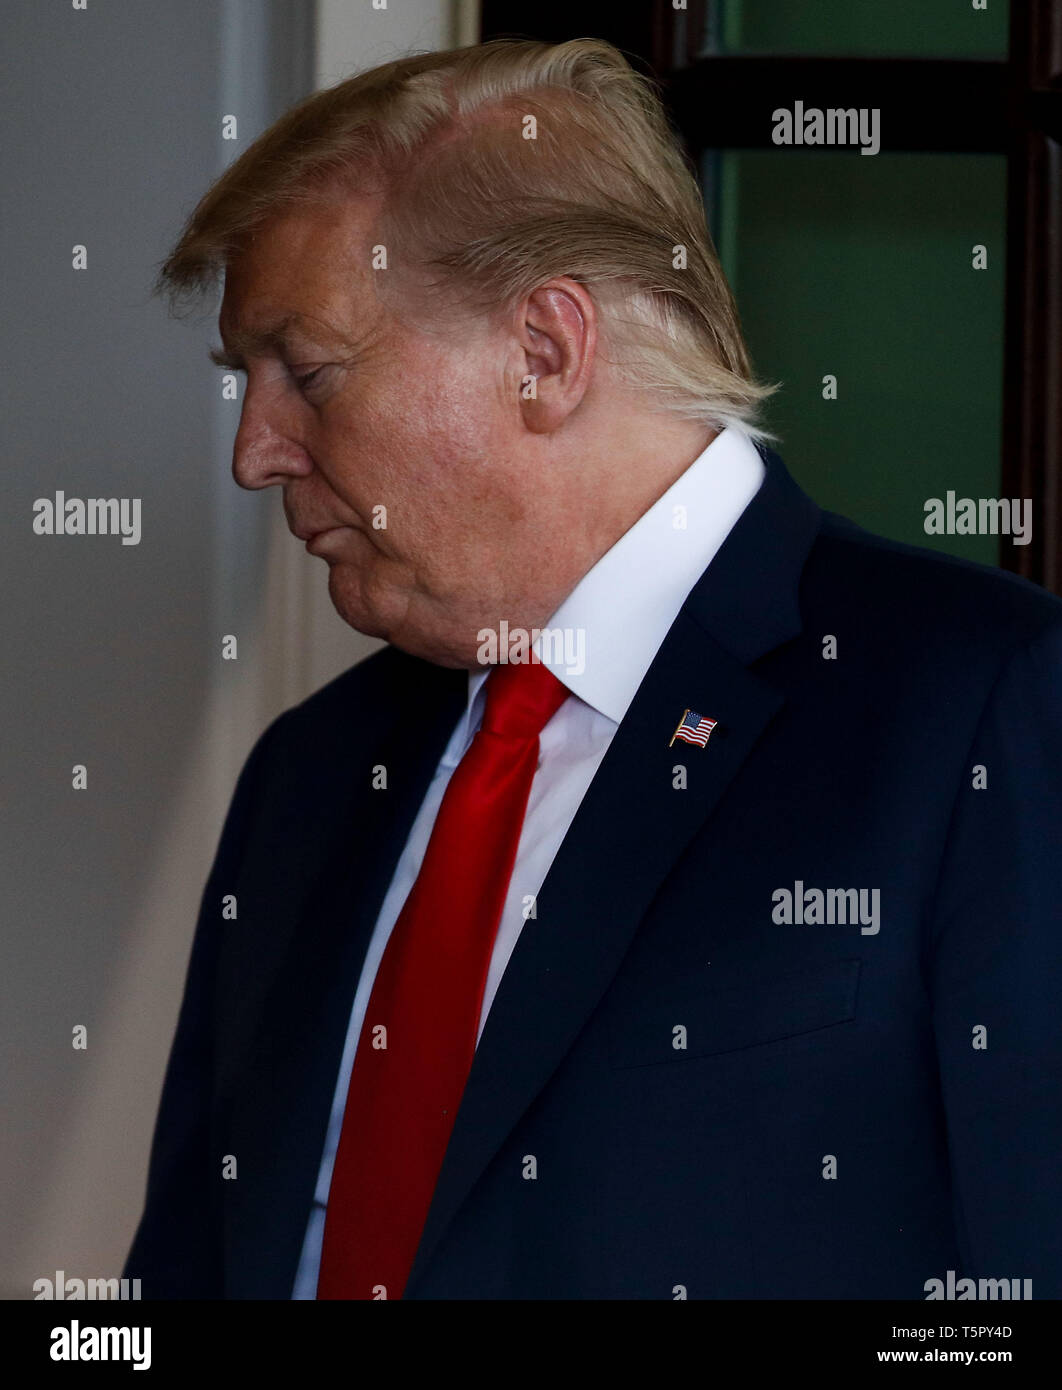 Washington, USA. 26th Apr, 2019. U.S. President Donald Trump is pictured at the White House in Washington, DC, the United States, on April 26, 2019. Trump announced on Friday that the United States is withdrawing from an international arms trade treaty signed by the Obama administration, marking Washington's latest exit from an international pact. Credit: Ting Shen/Xinhua/Alamy Live News Stock Photo